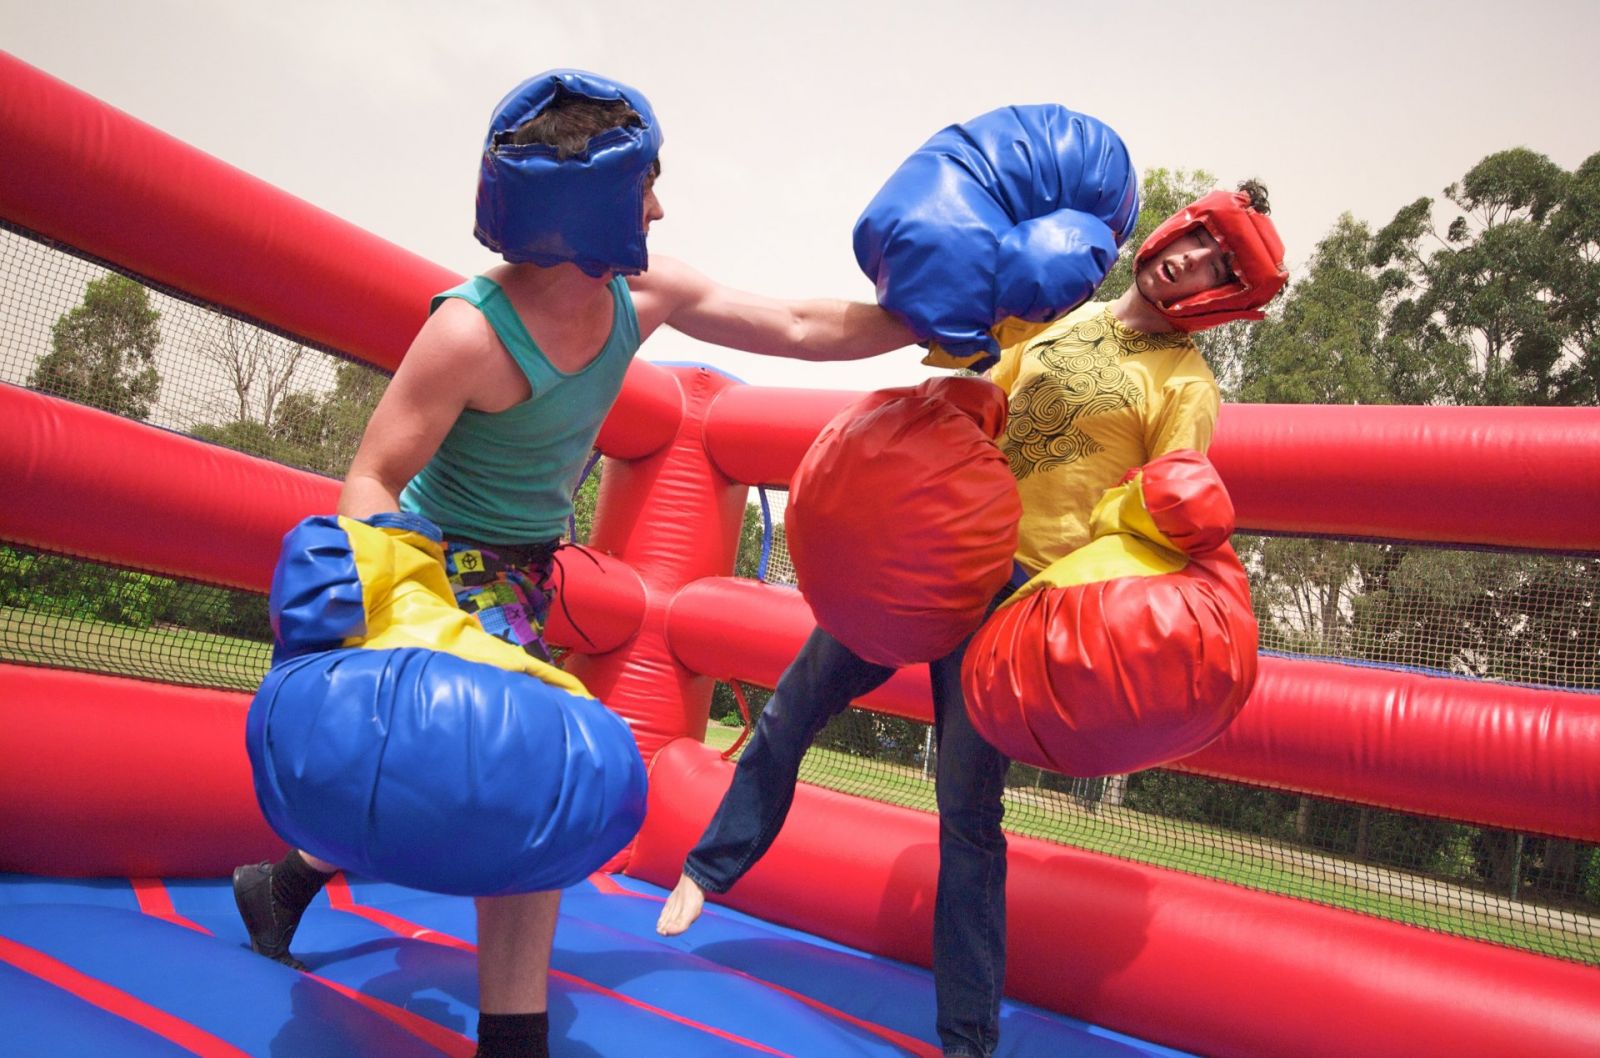 Bouncy Boxing Inflatable rental for parties in Austin Texas from Austin Bounce House Rentals